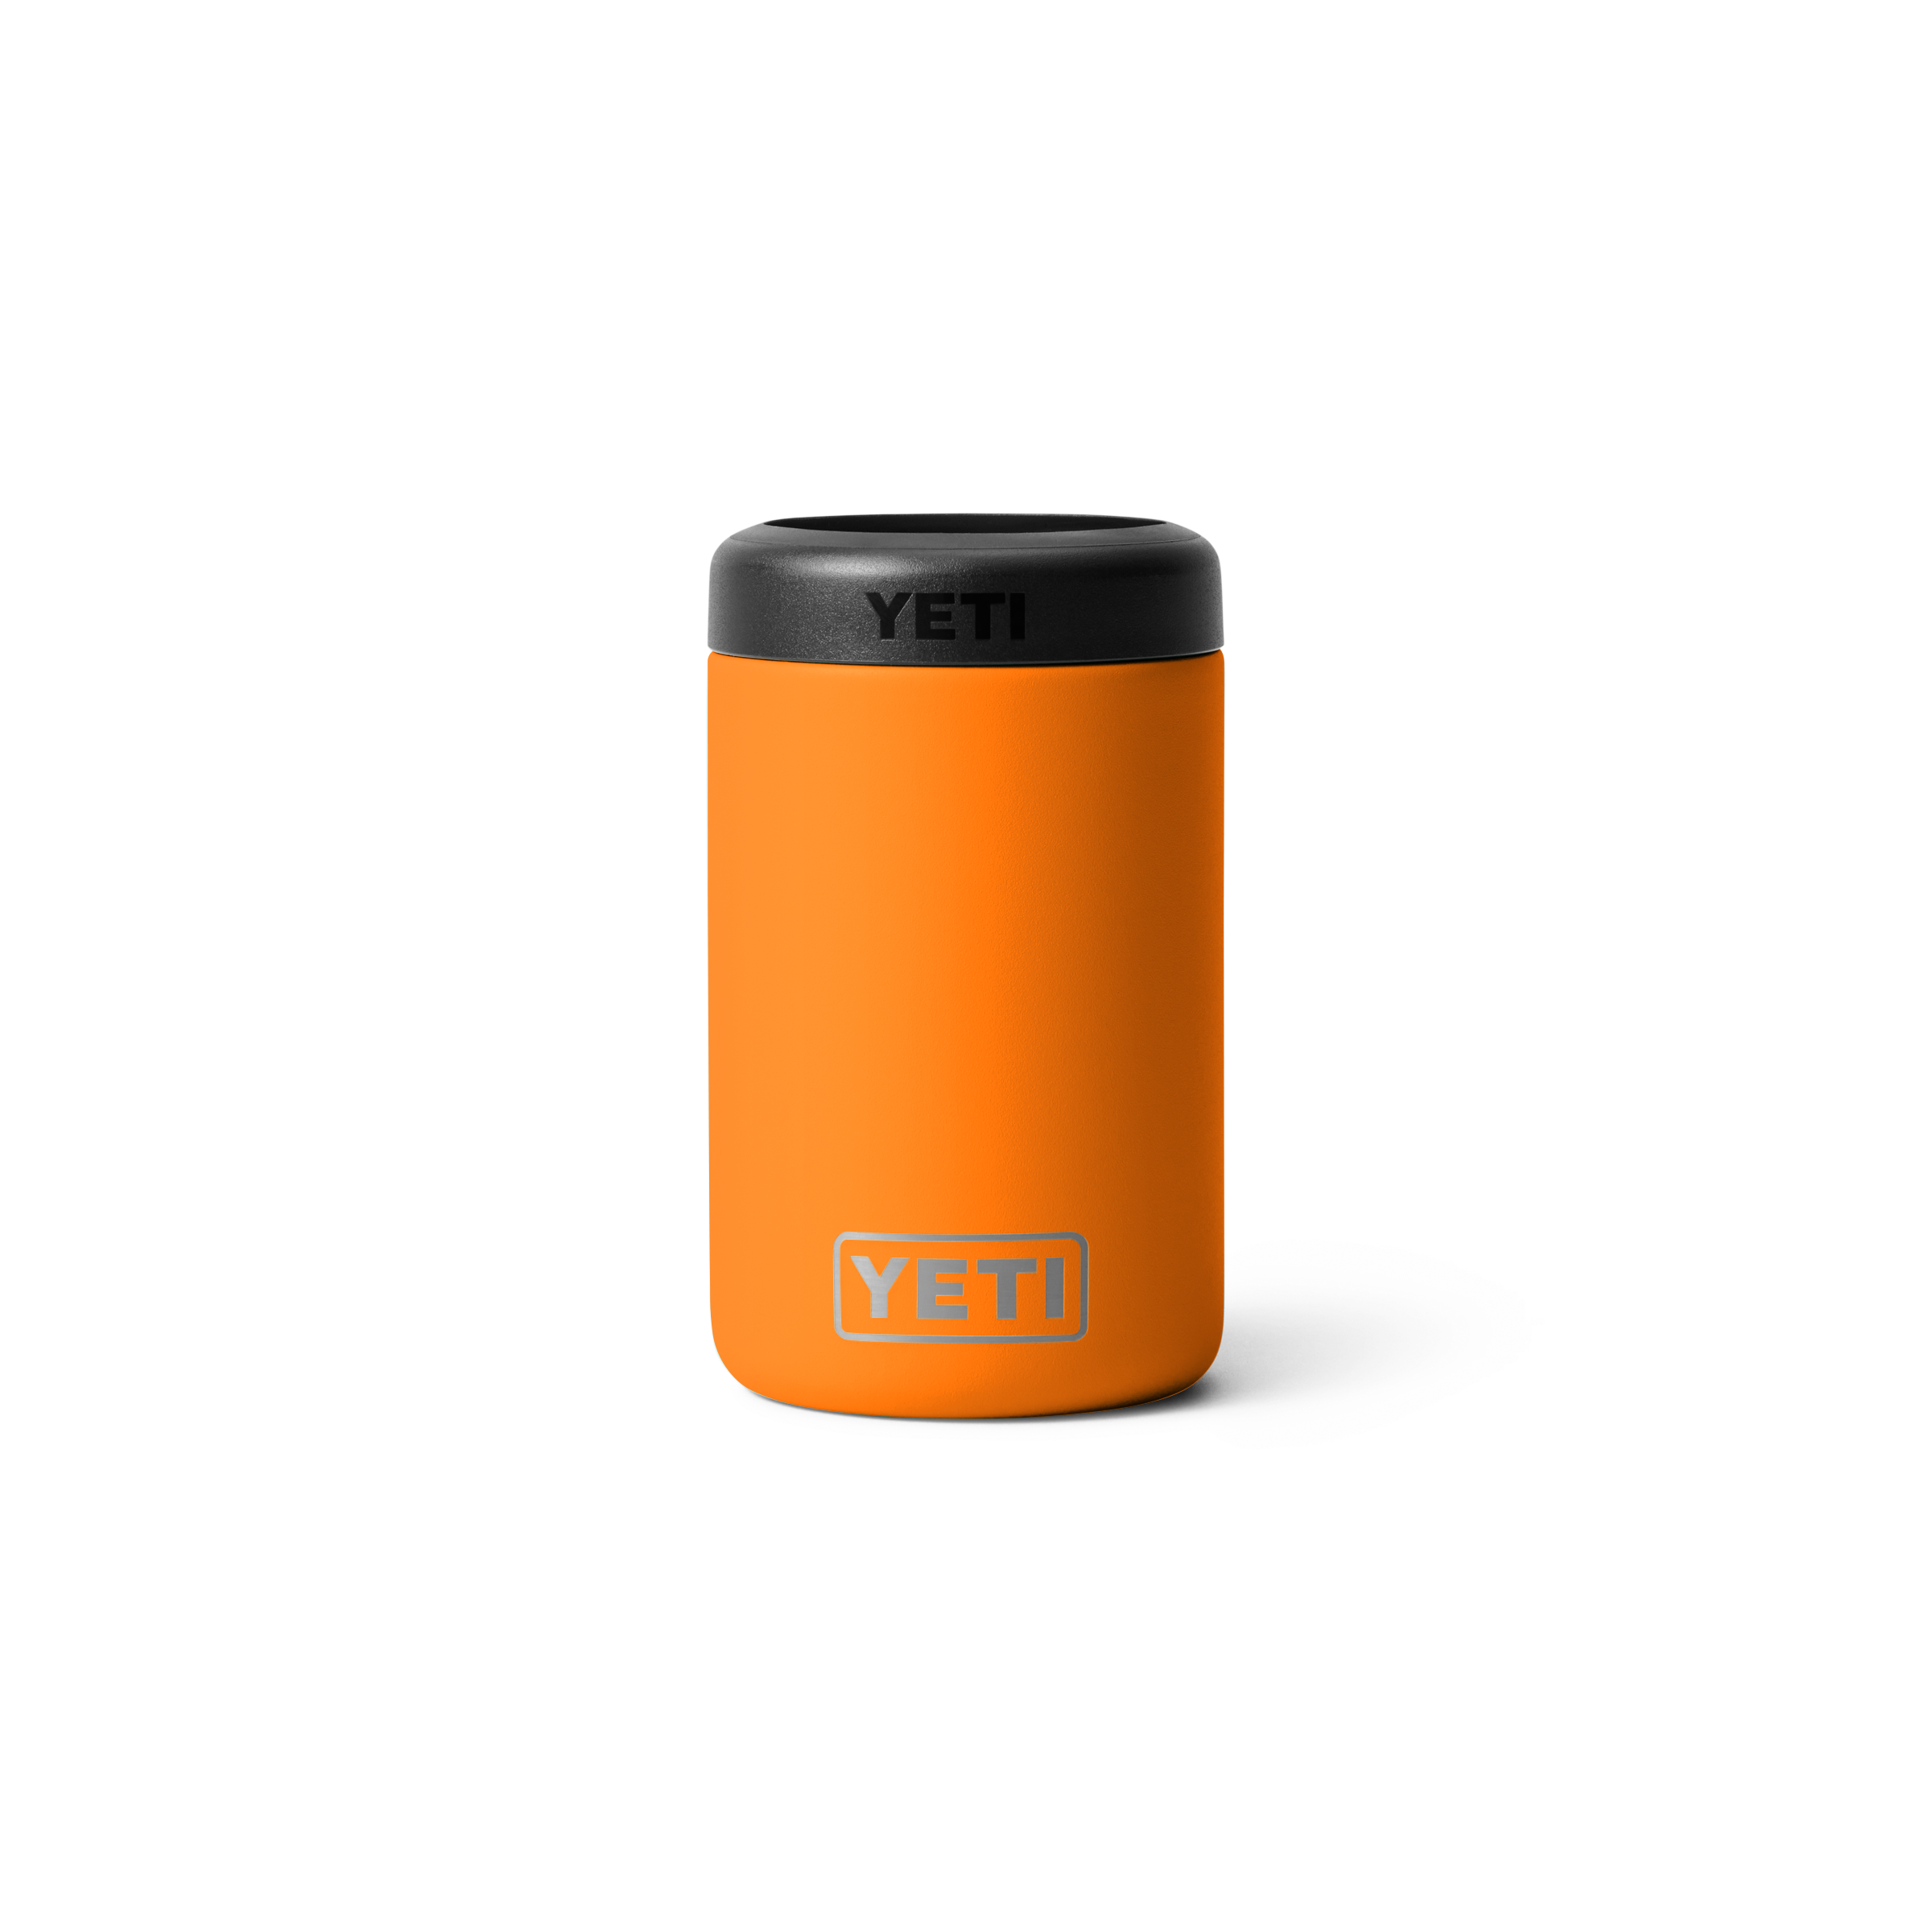 stubby holder, keeps hands dry, keeps cool can cool, dishwasher safe, puncture and rust resistant 